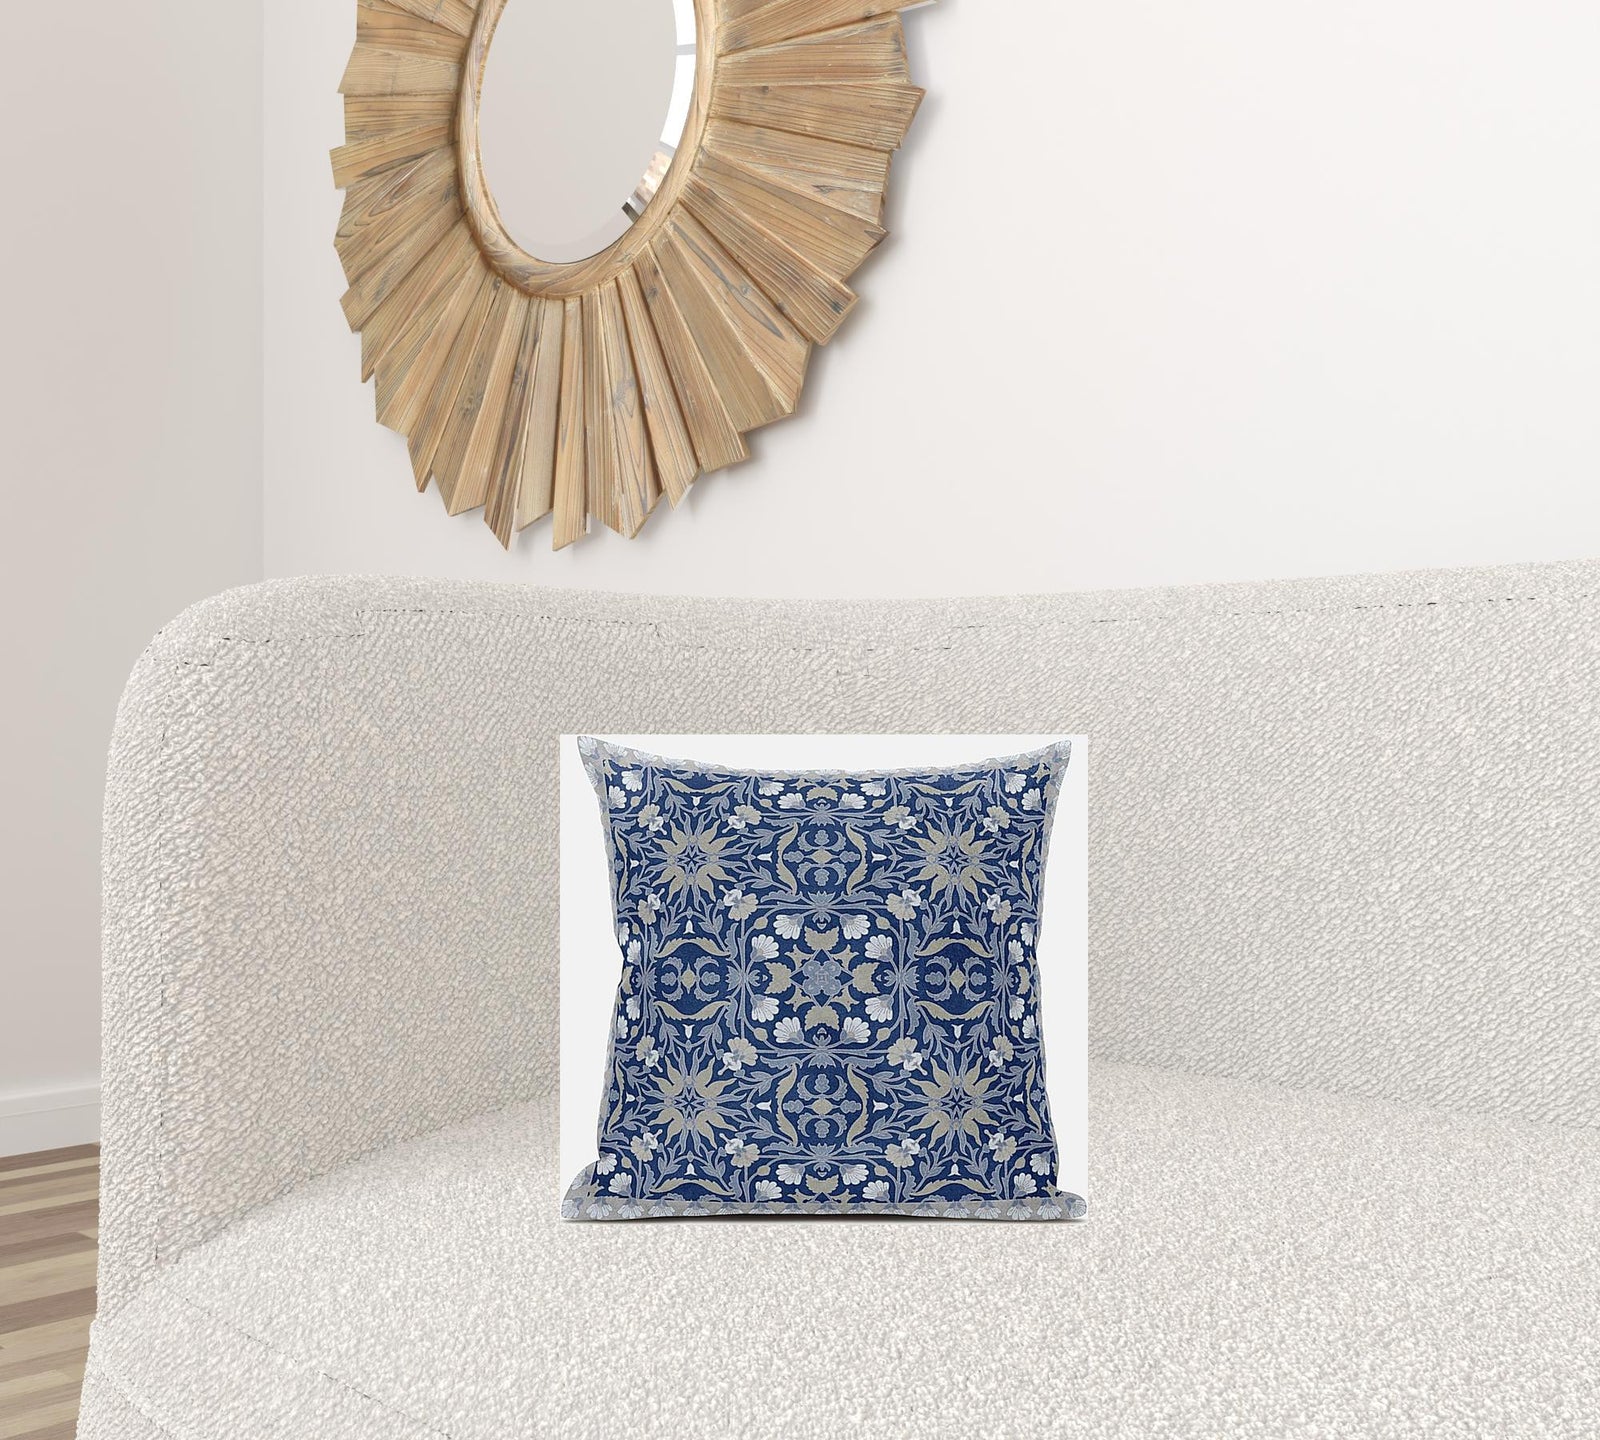 16” Blue Gray Paisley Zippered Suede Throw Pillow